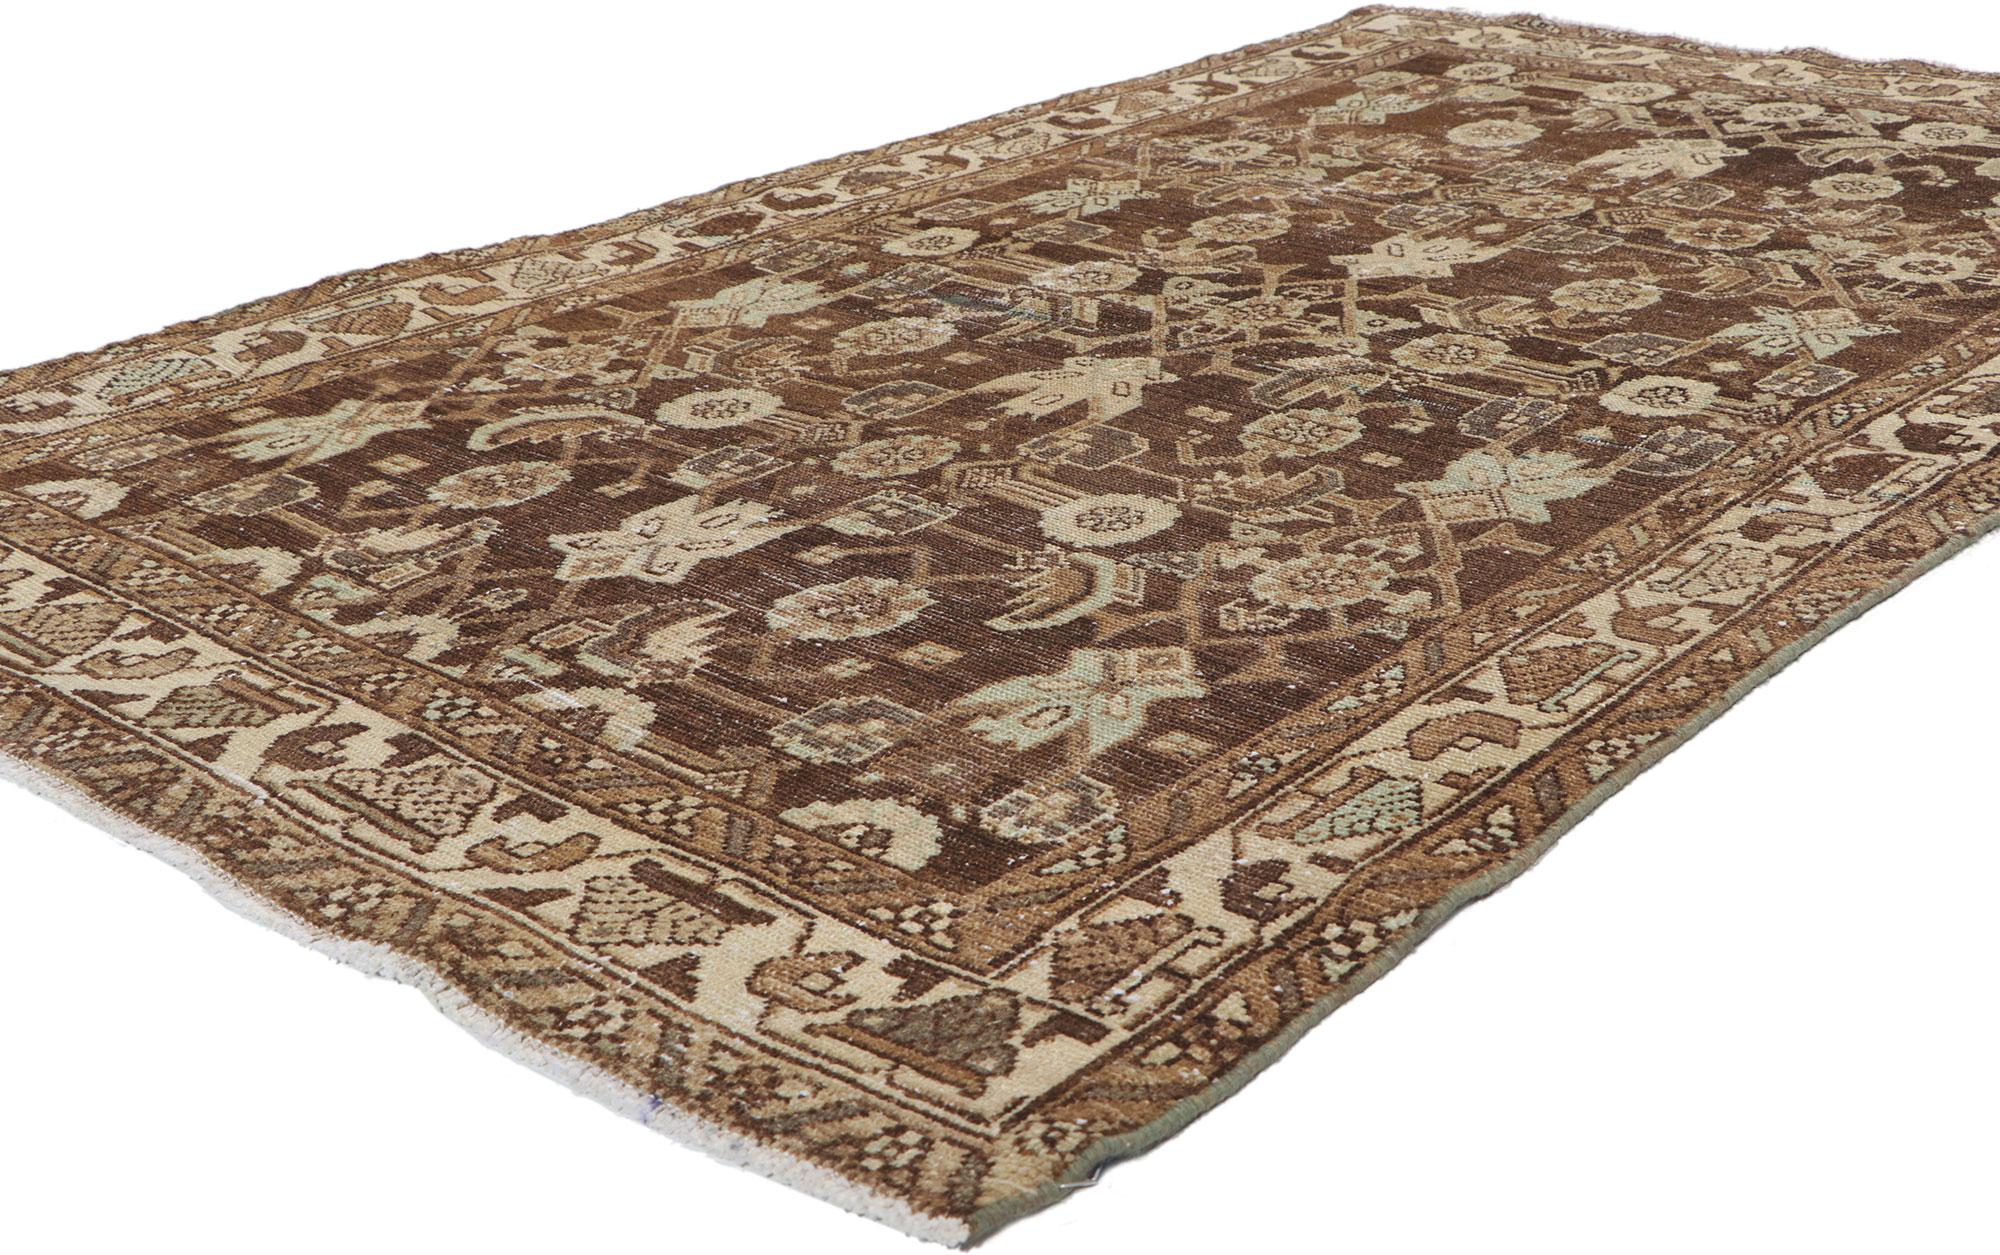 60971 Antique Brown Persian Malayer Rug, 03'10 x 06'06.
​Prepare for a mesmerizing adventure whisked away by the warm embrace of this hand knotted wool antique Persian Malayer rug. This enchanting Persian carpet will transport you to a world of